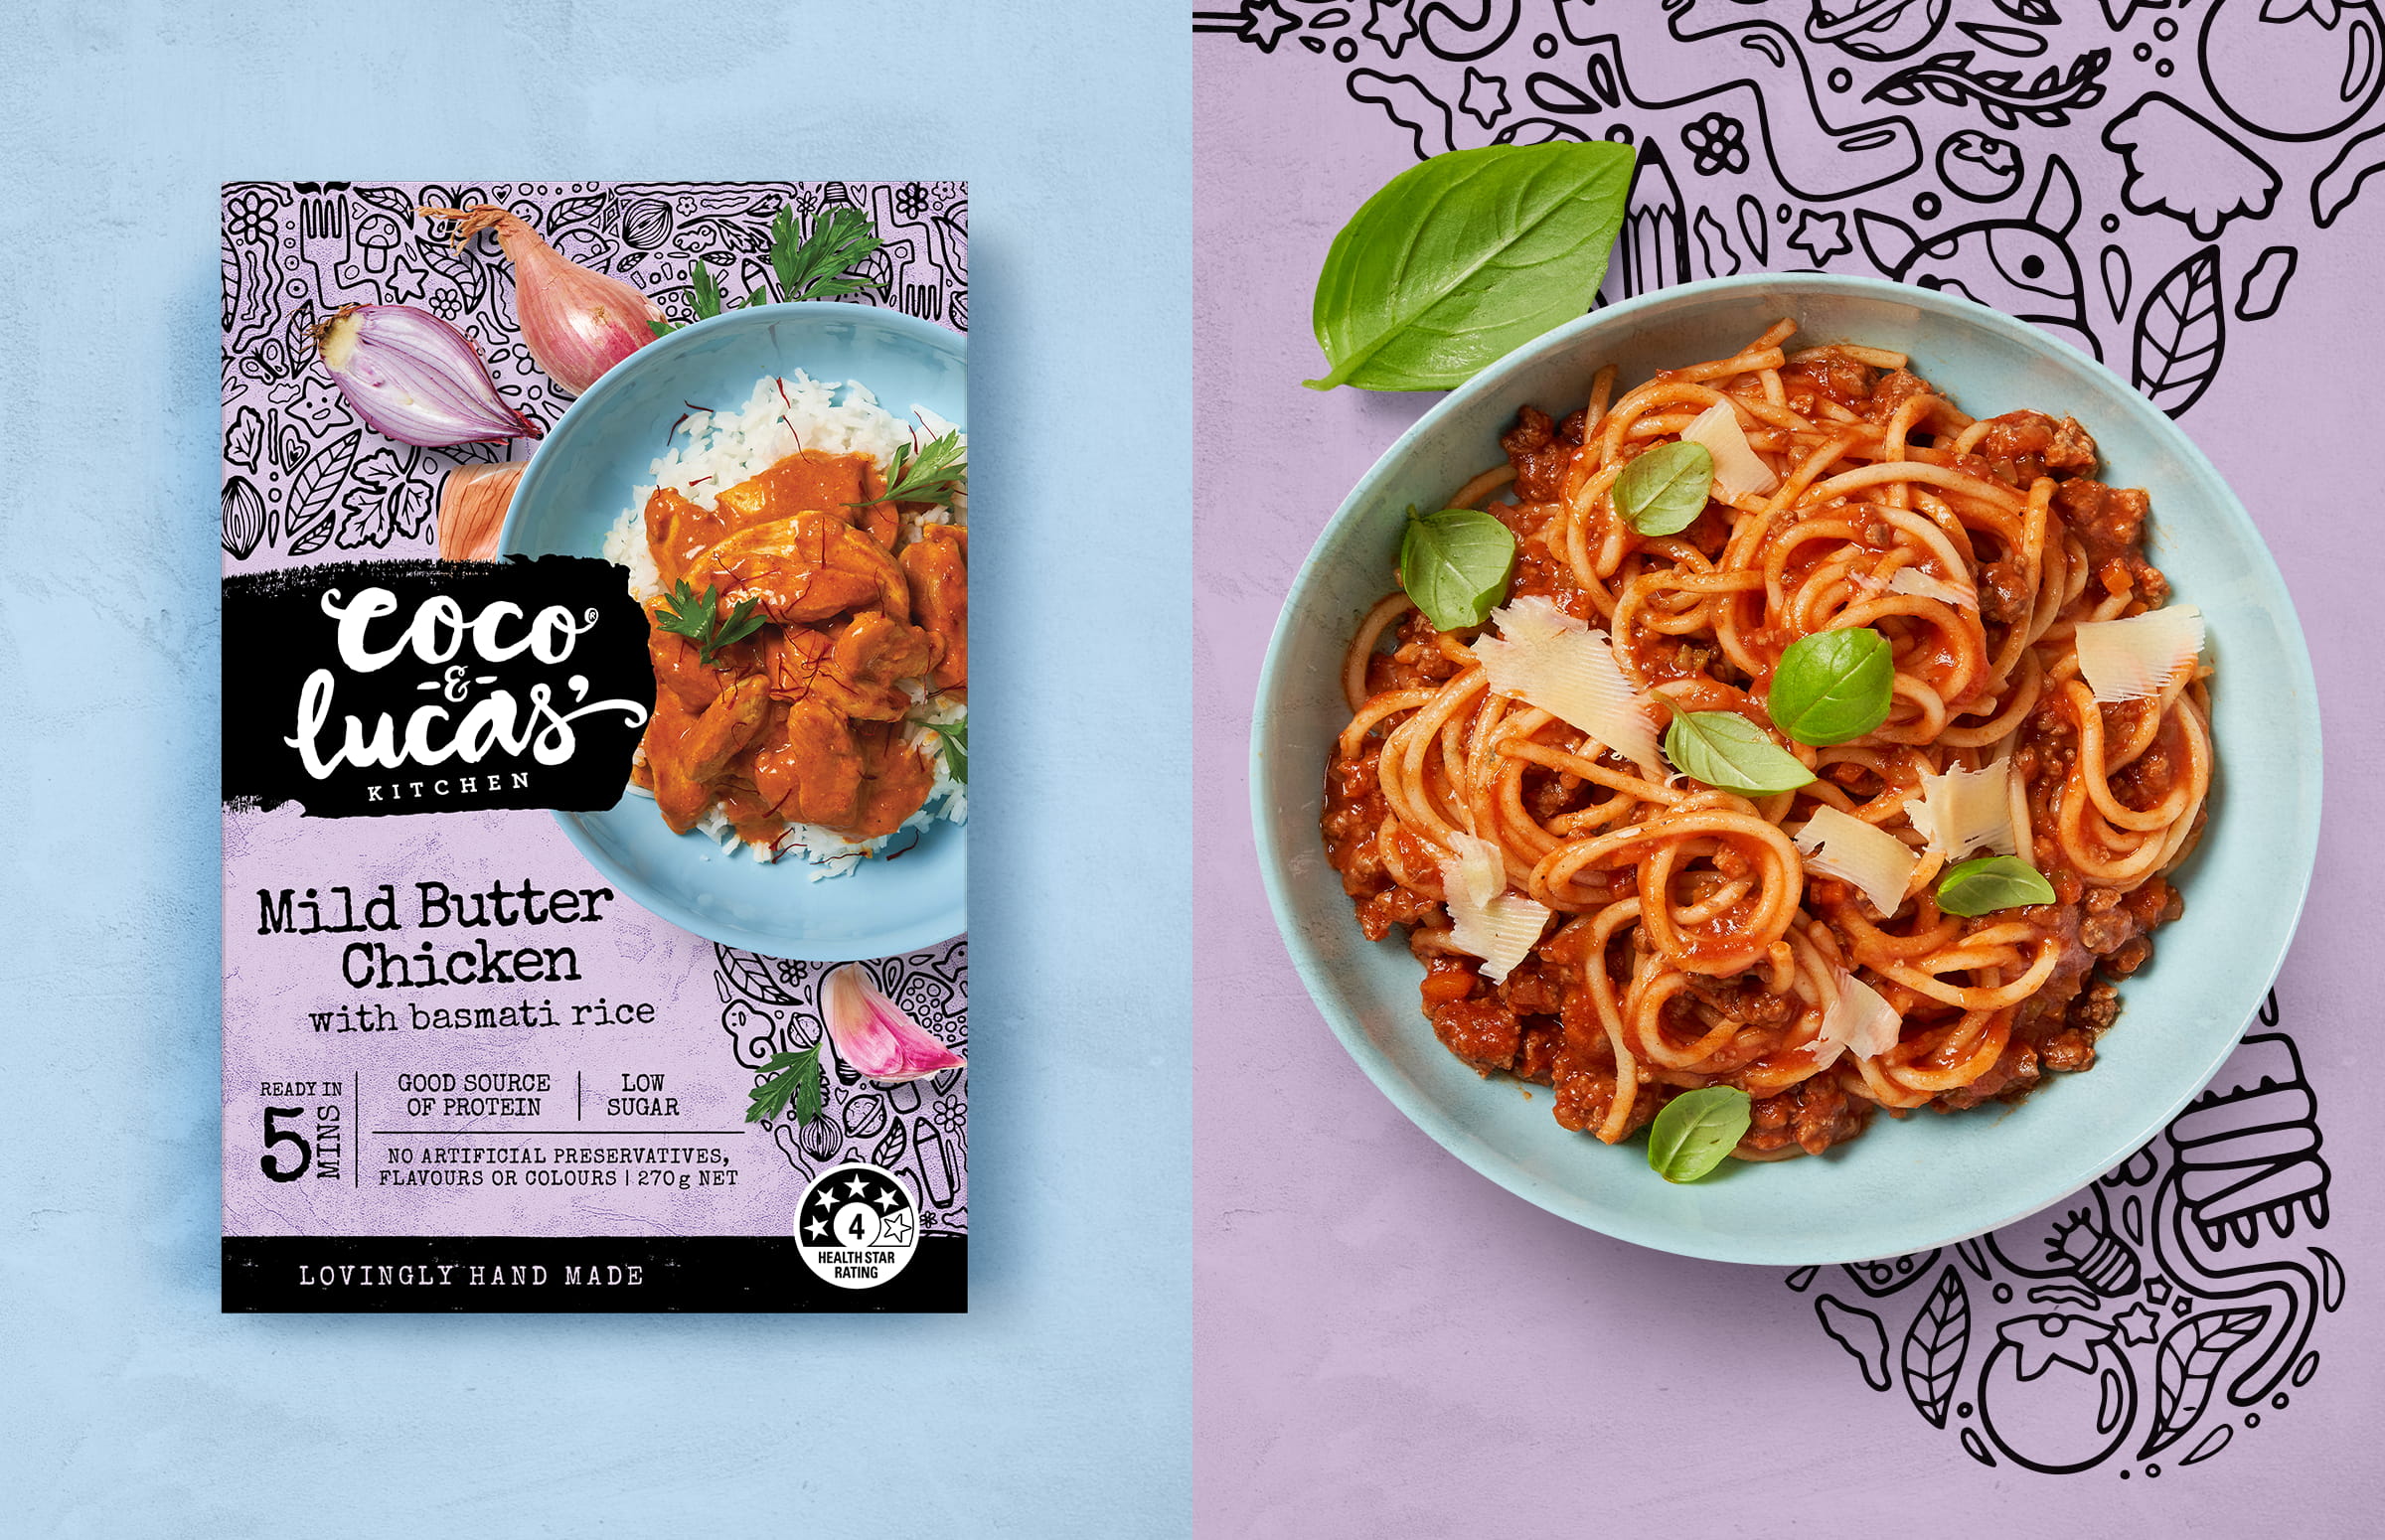 scribbles-kids-menu-meal-purple-pastels-bolognese-butter-chicken-packagng-design-rebrand-boxer-and-co